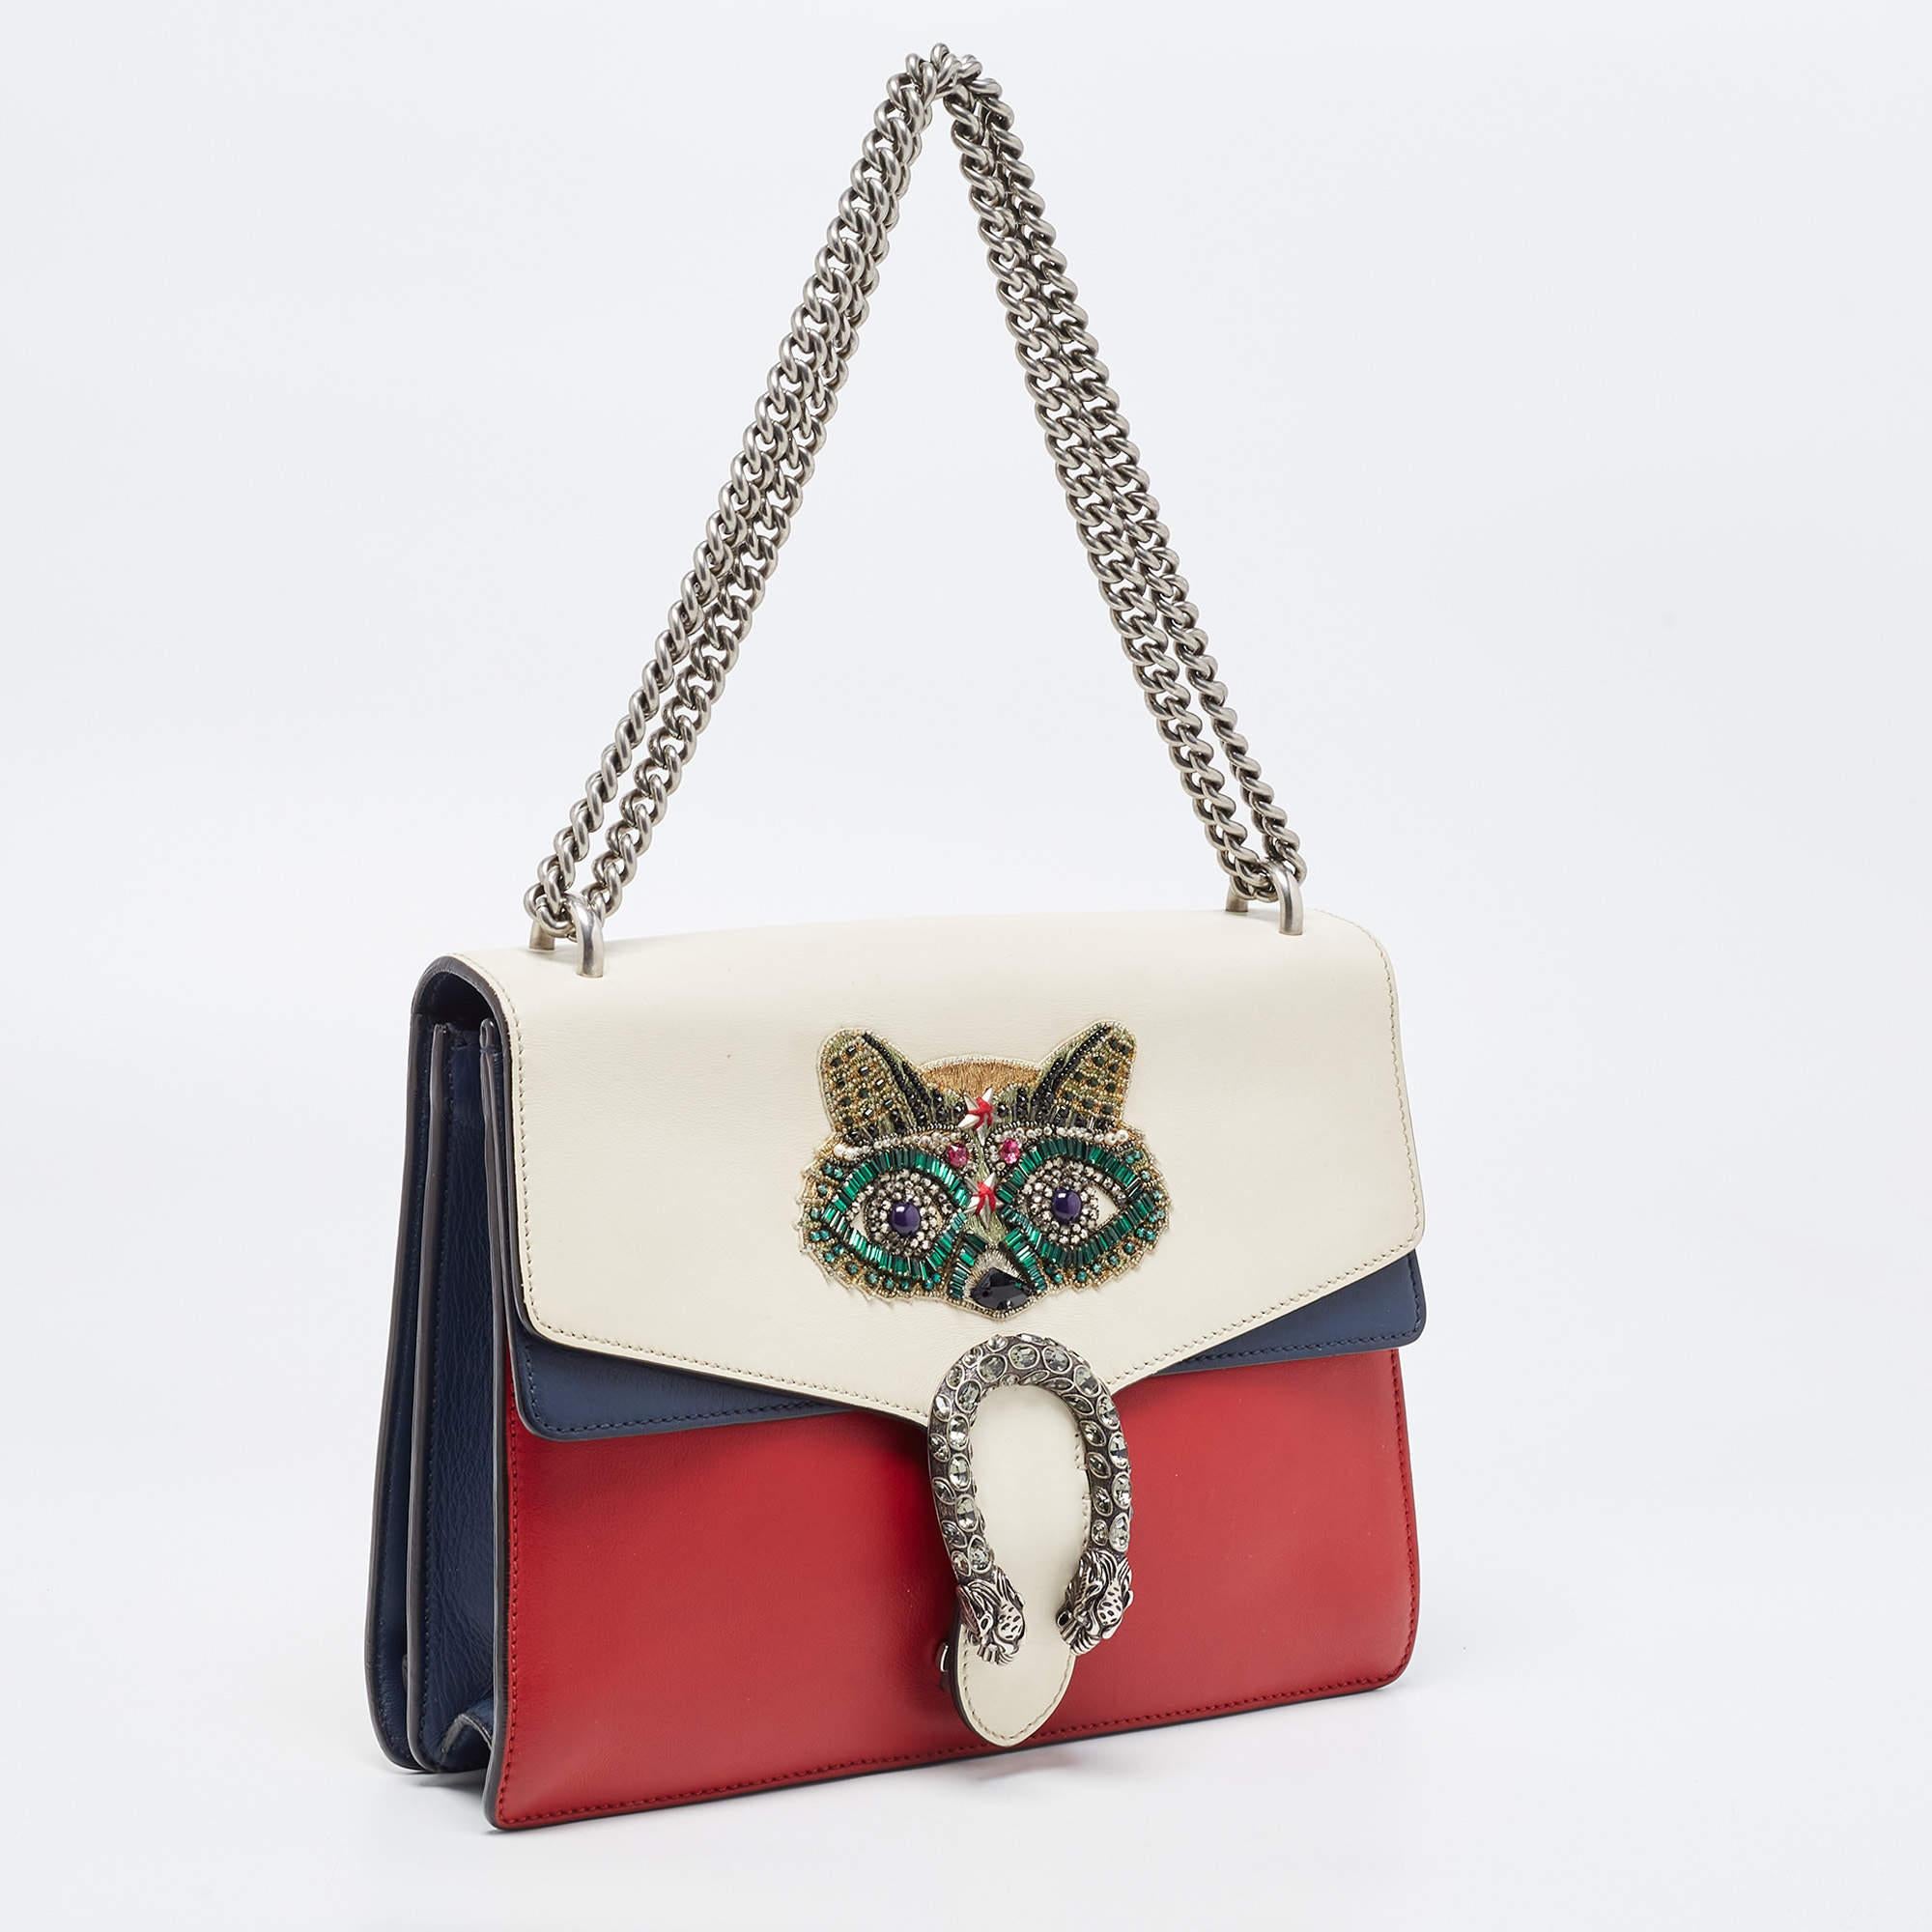 For a look that is complete with style, taste, and a touch of luxe, this Gucci limited edition Dionysus bag is the perfect addition. Flaunt this beauty on your shoulder and revel in the taste of luxury it leaves you with.

